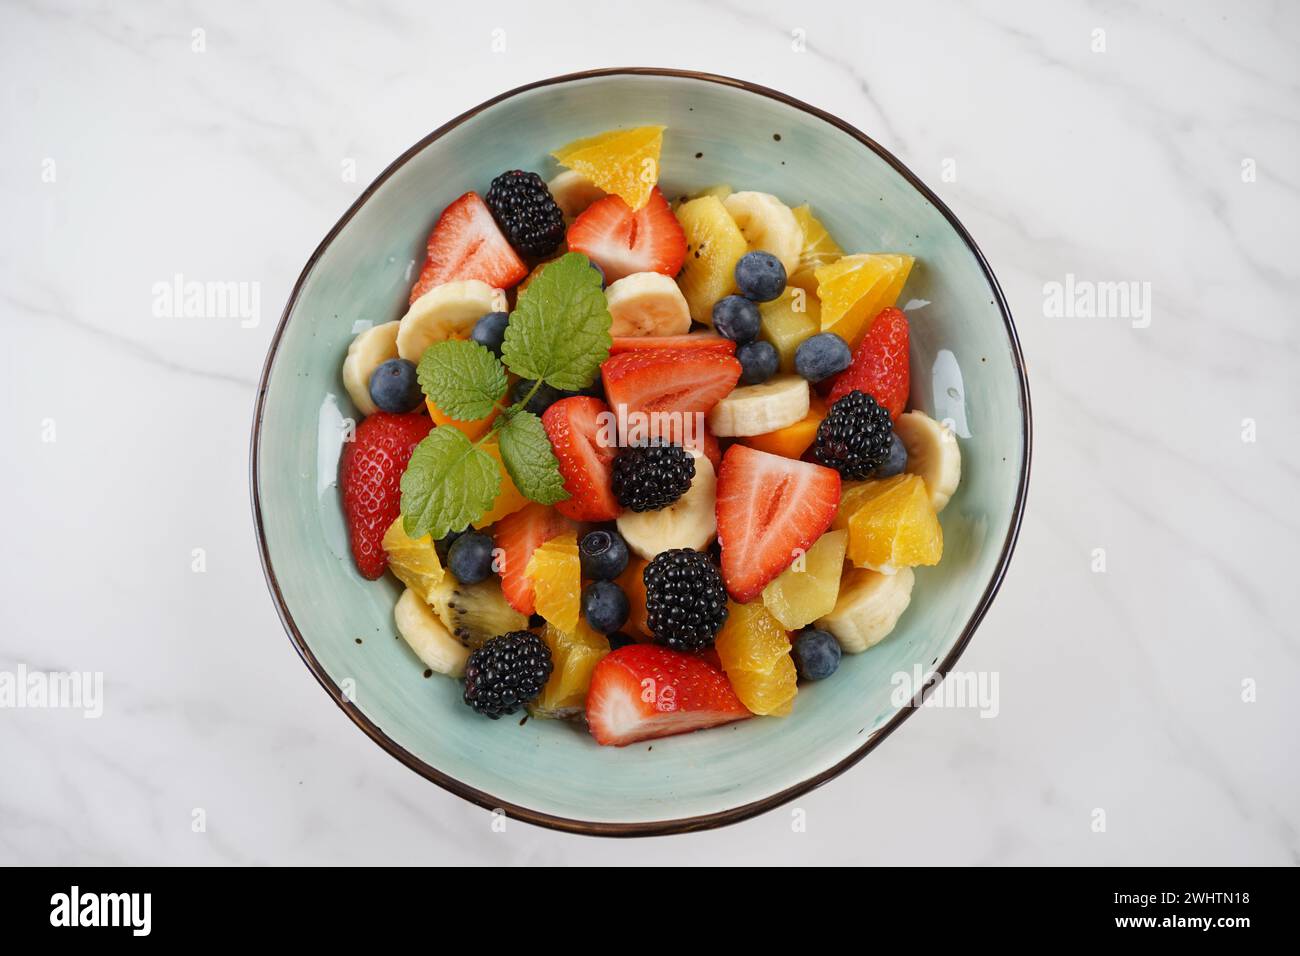 Summer Fruit salad with oranges, strawberries, blueberries, blackberries and fresh mint. Healthy food Stock Photo